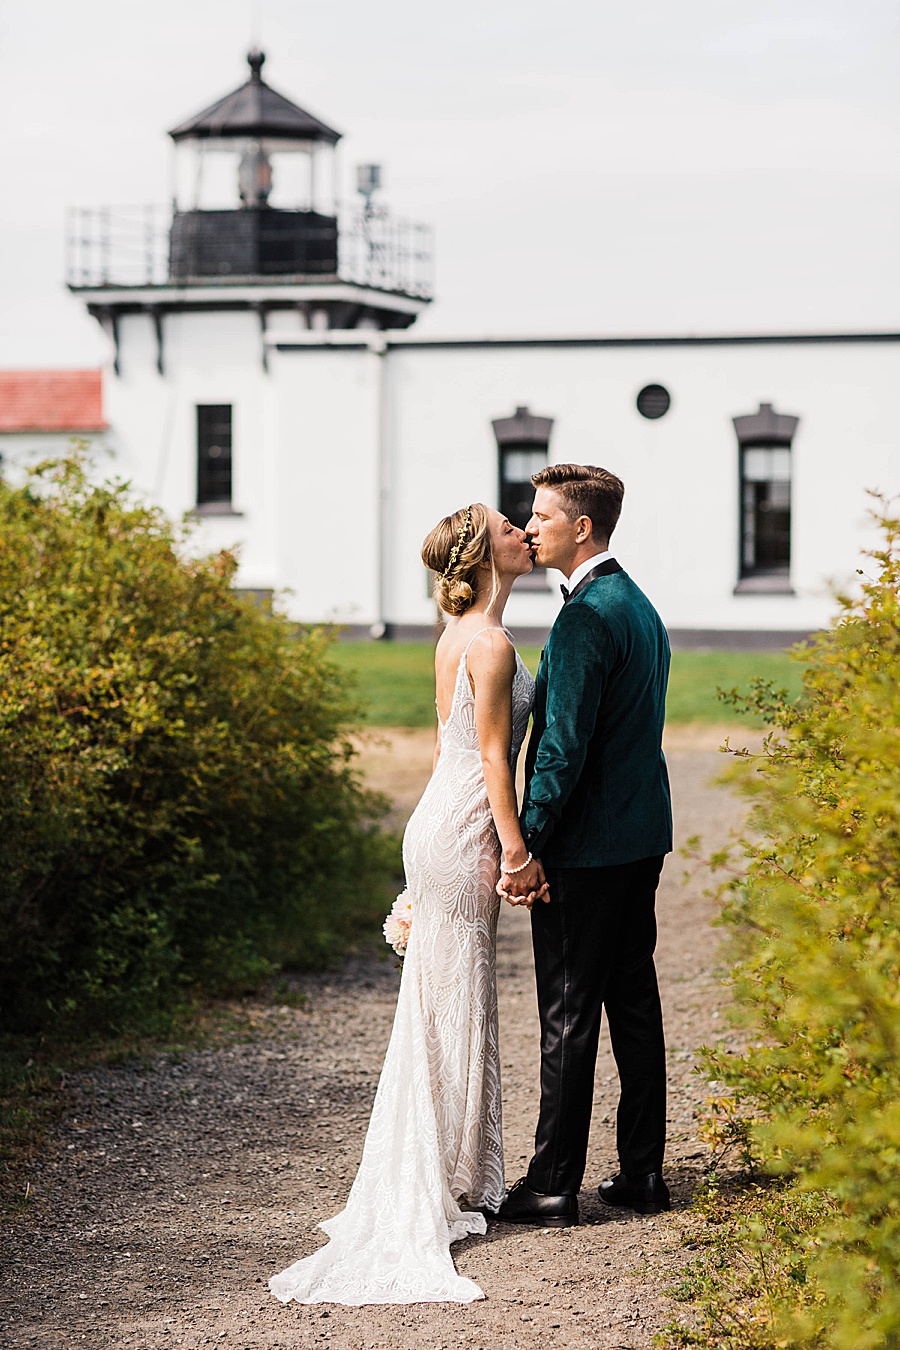 A bride kisses her groom, wearing a green suit, in front of a lighthouse in Washington.